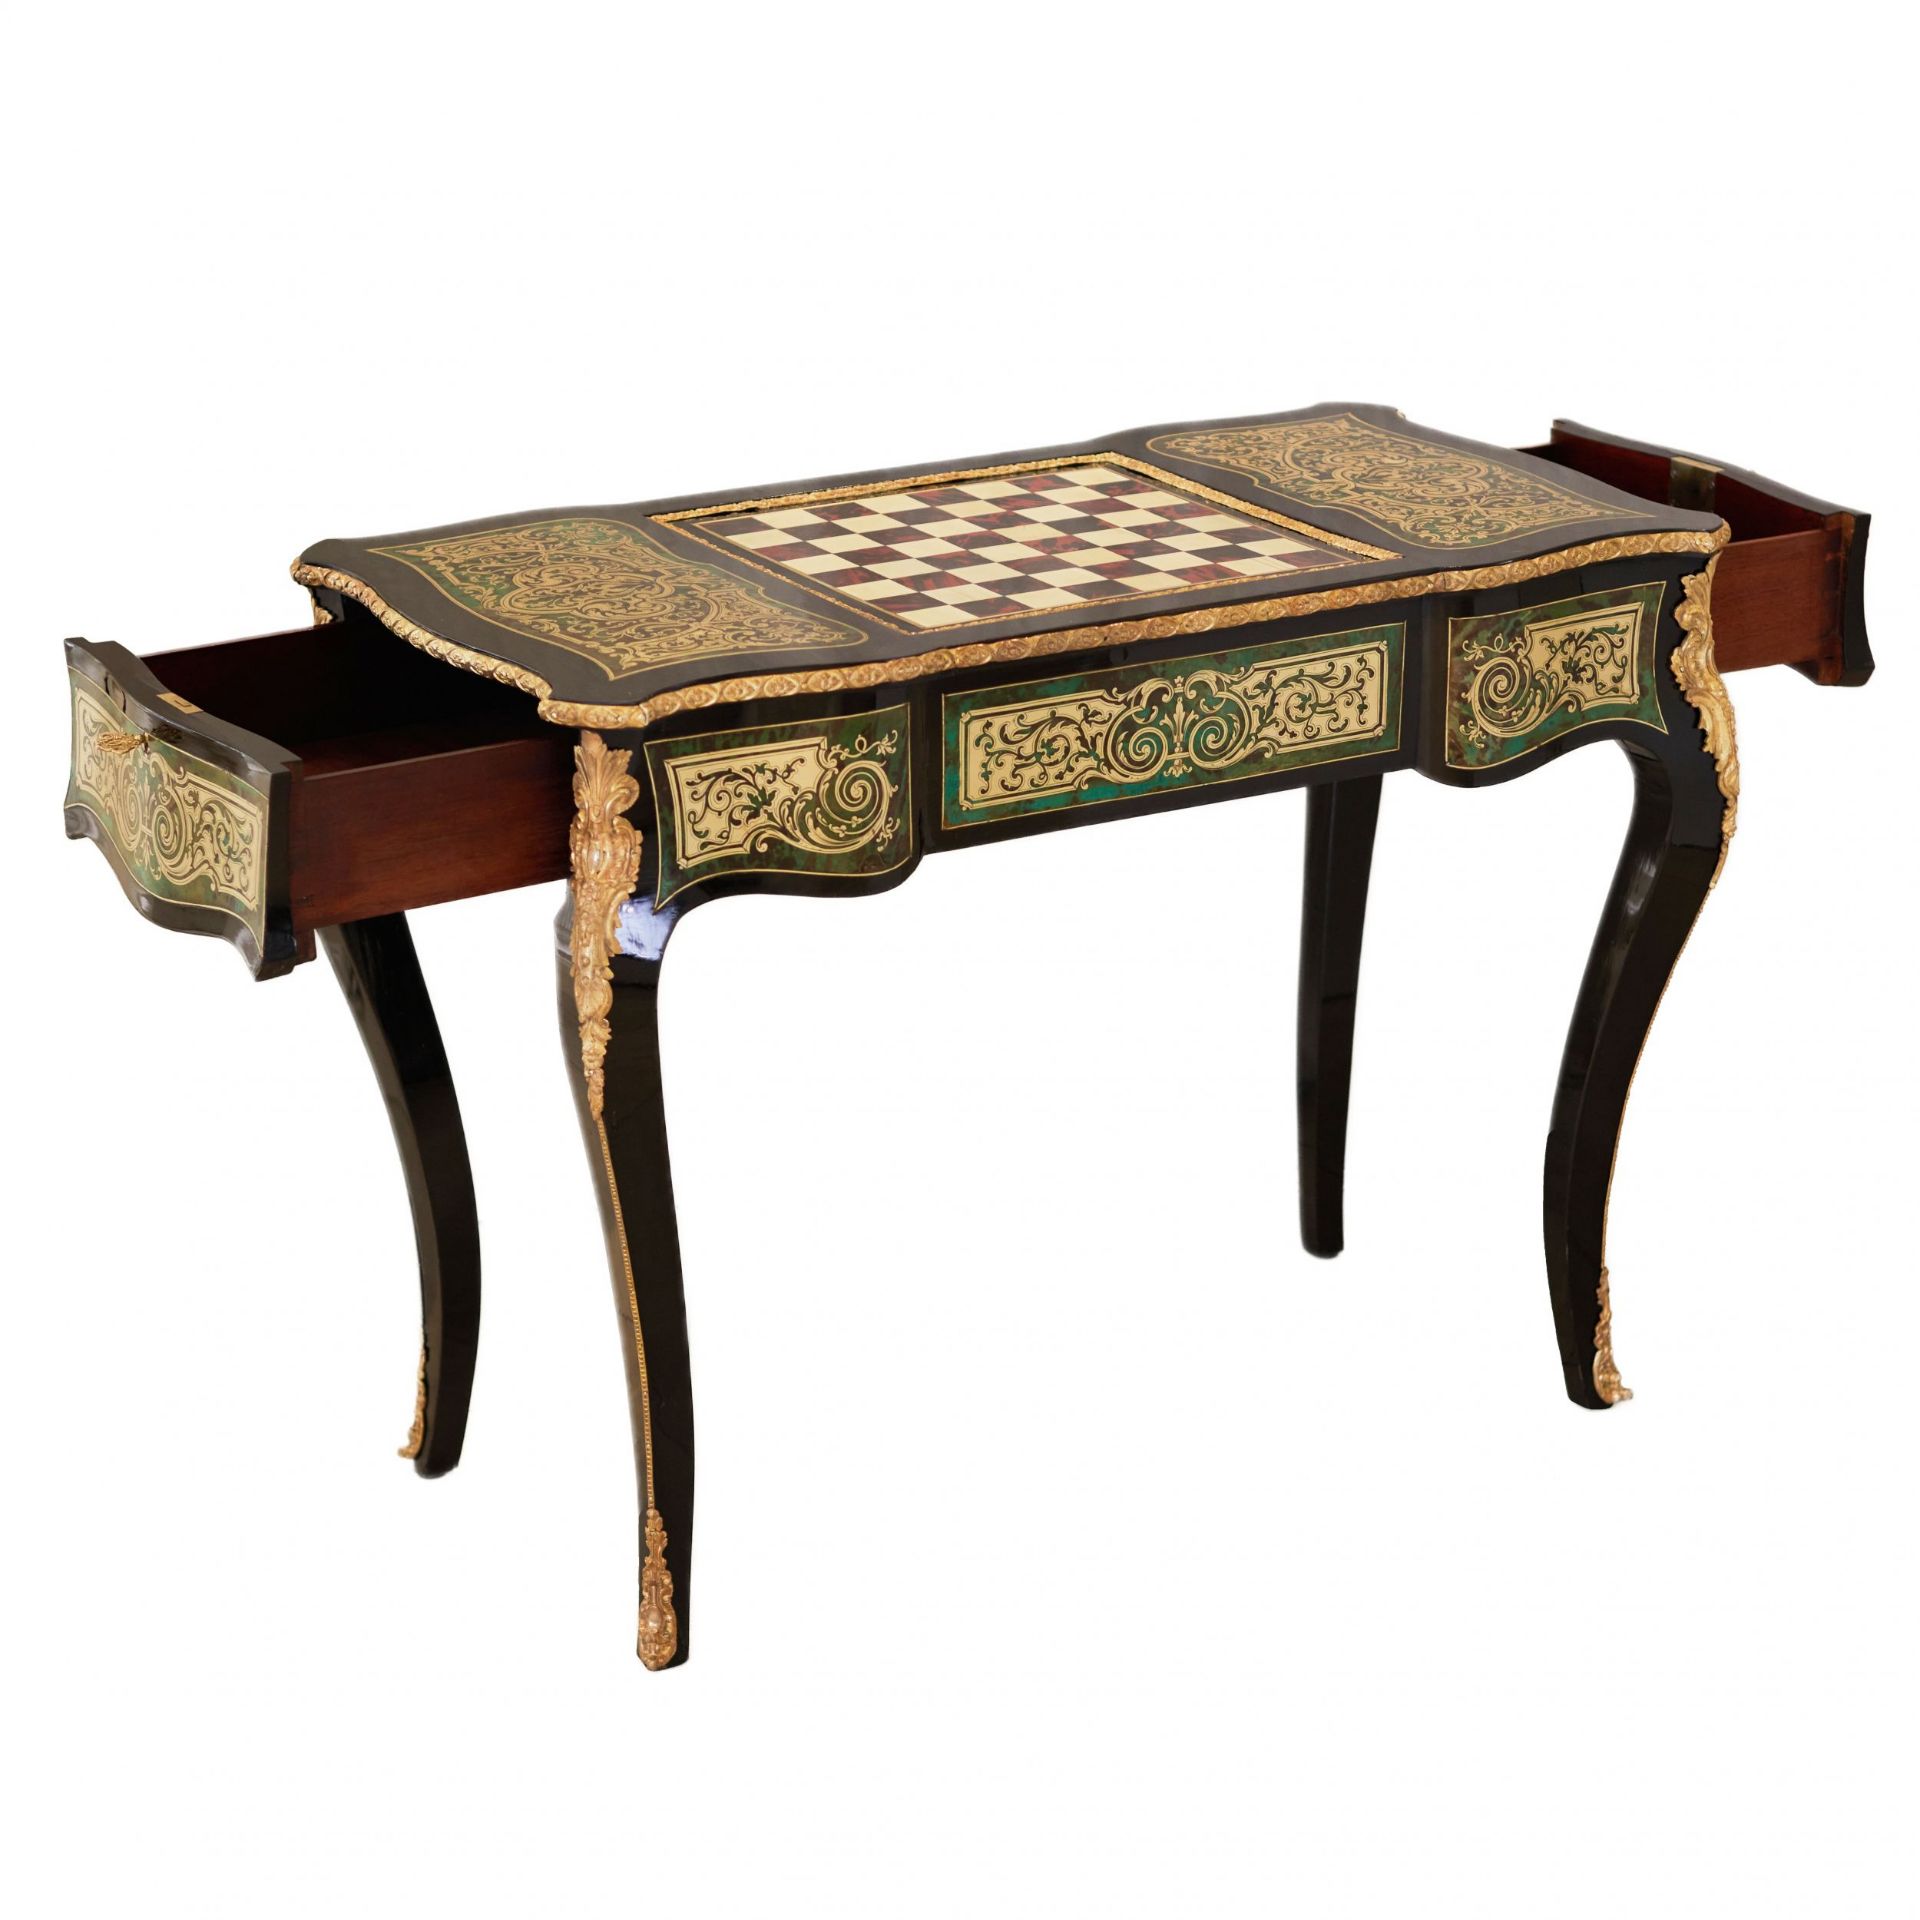 Game chess table in Boulle style. France. Turn of the 19th-20th century. - Image 6 of 11